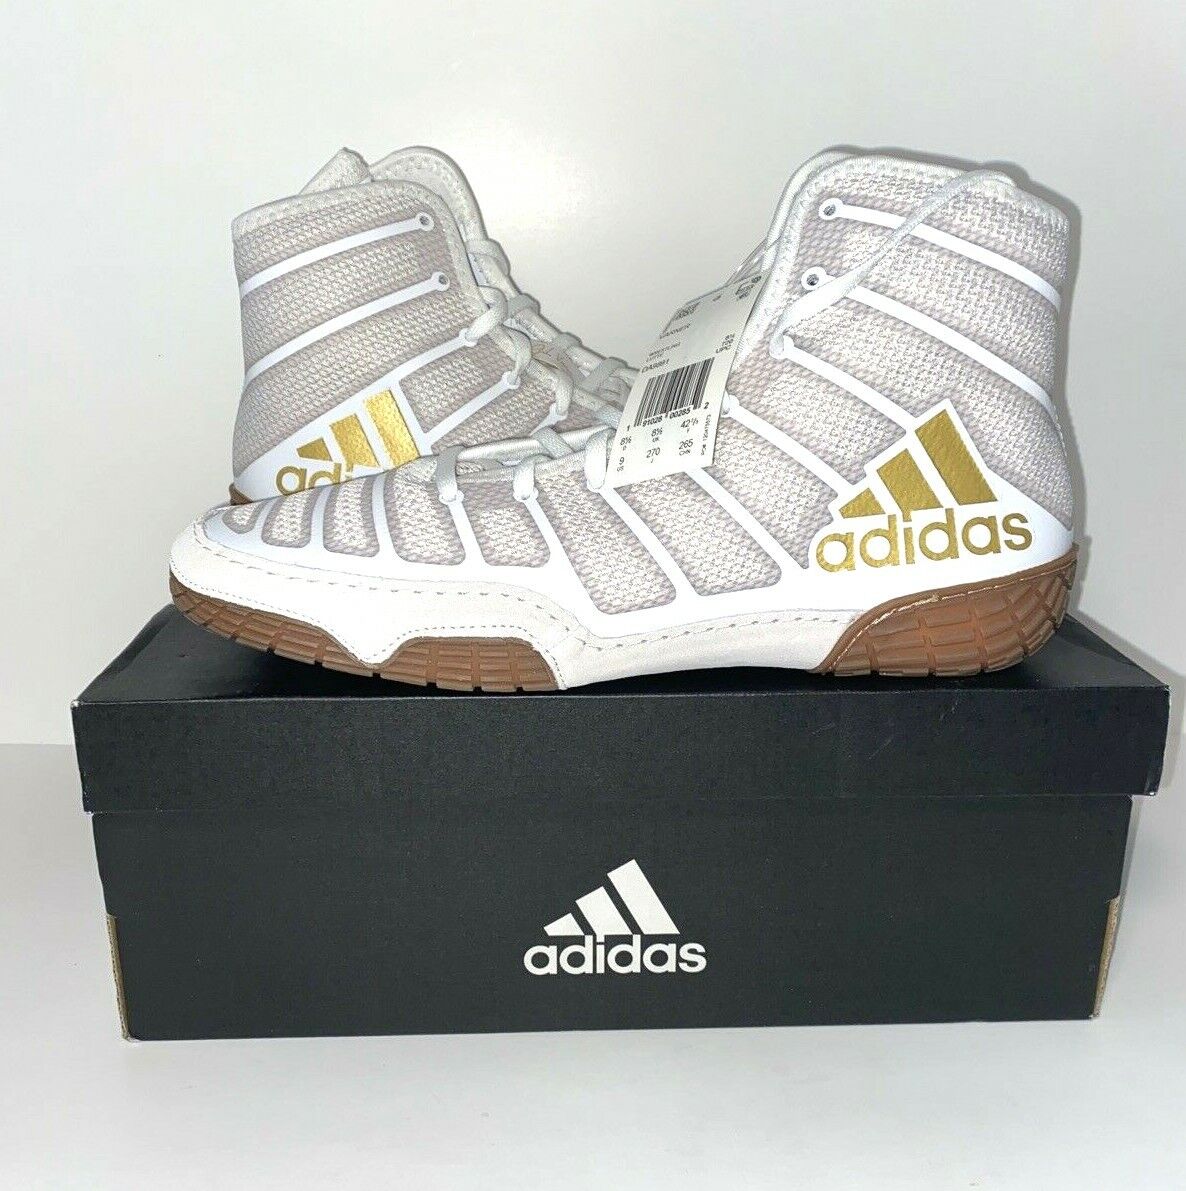 adidas varner 2 white and gold